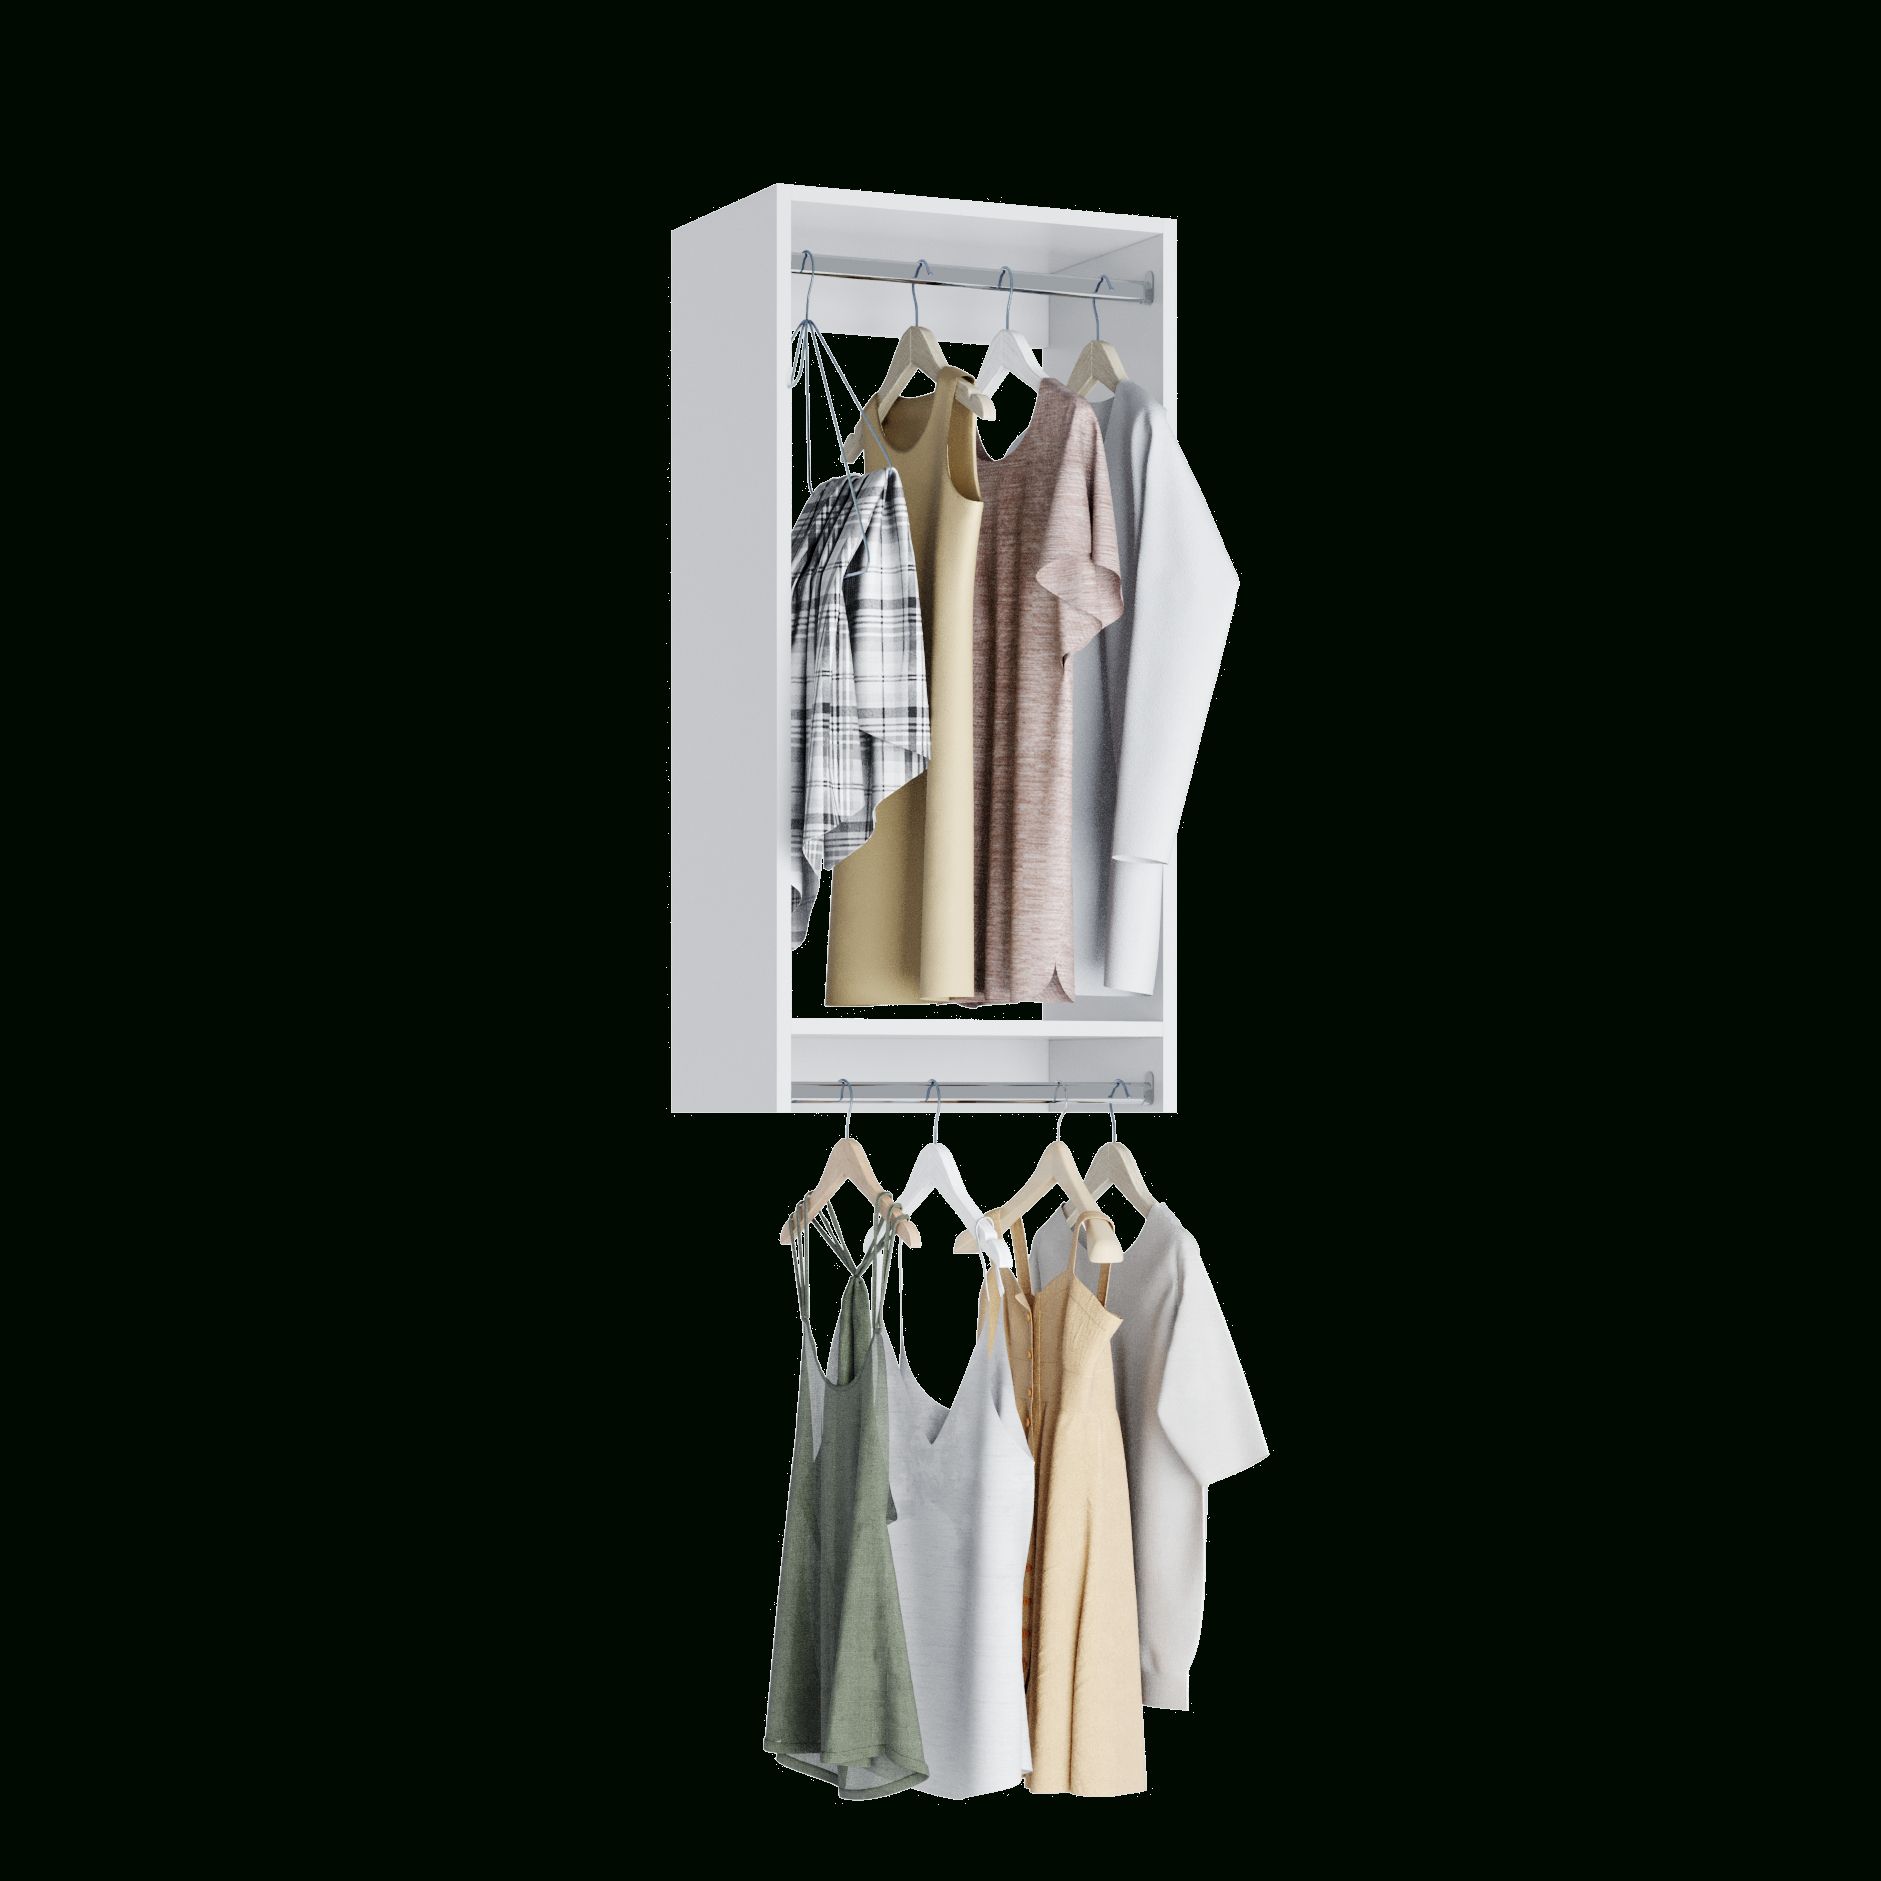 Double Hanging Closet Organizer: Great Price, Better Design Throughout Double Hanging Rail For Wardrobes (Gallery 8 of 20)